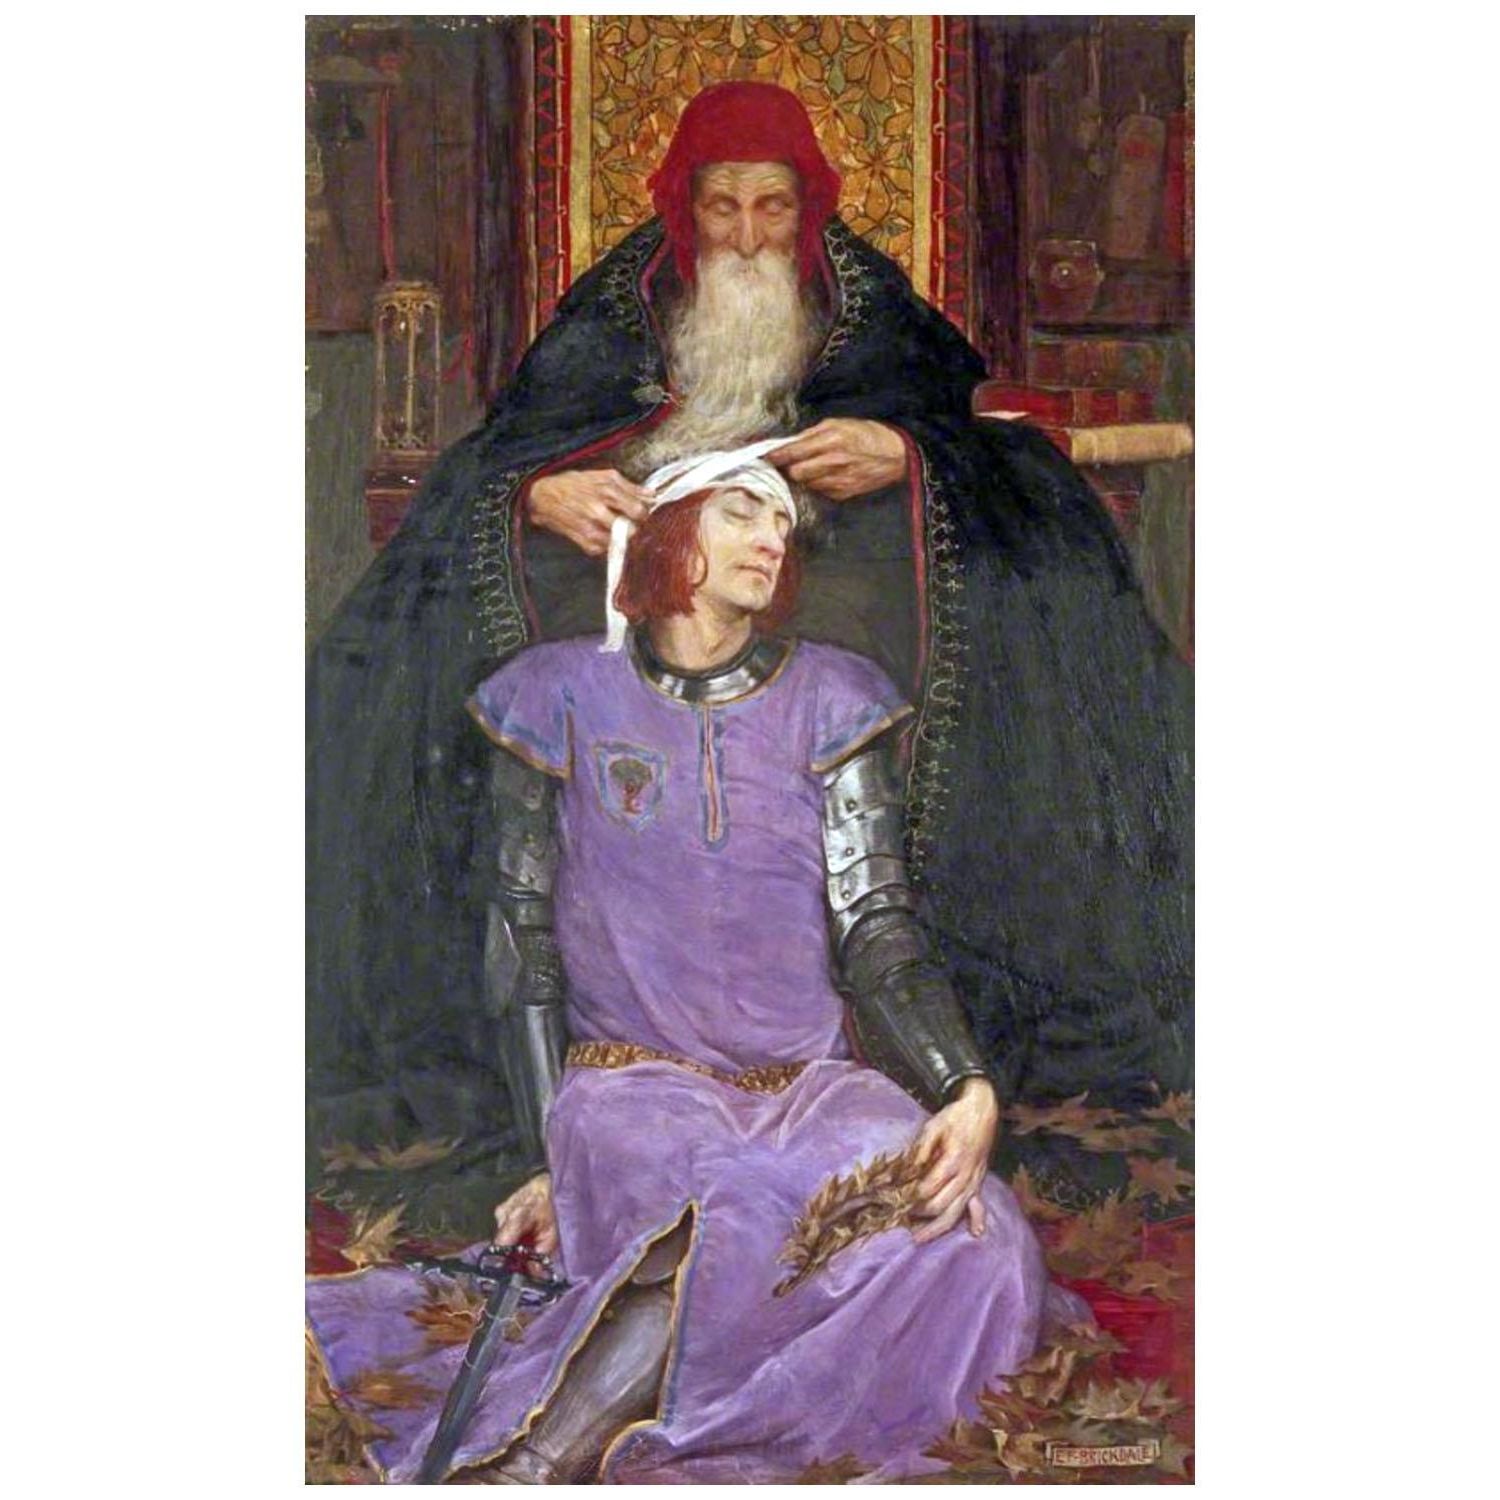 Eleanor Fortescue-Brickdale. Time the Physician. 1900